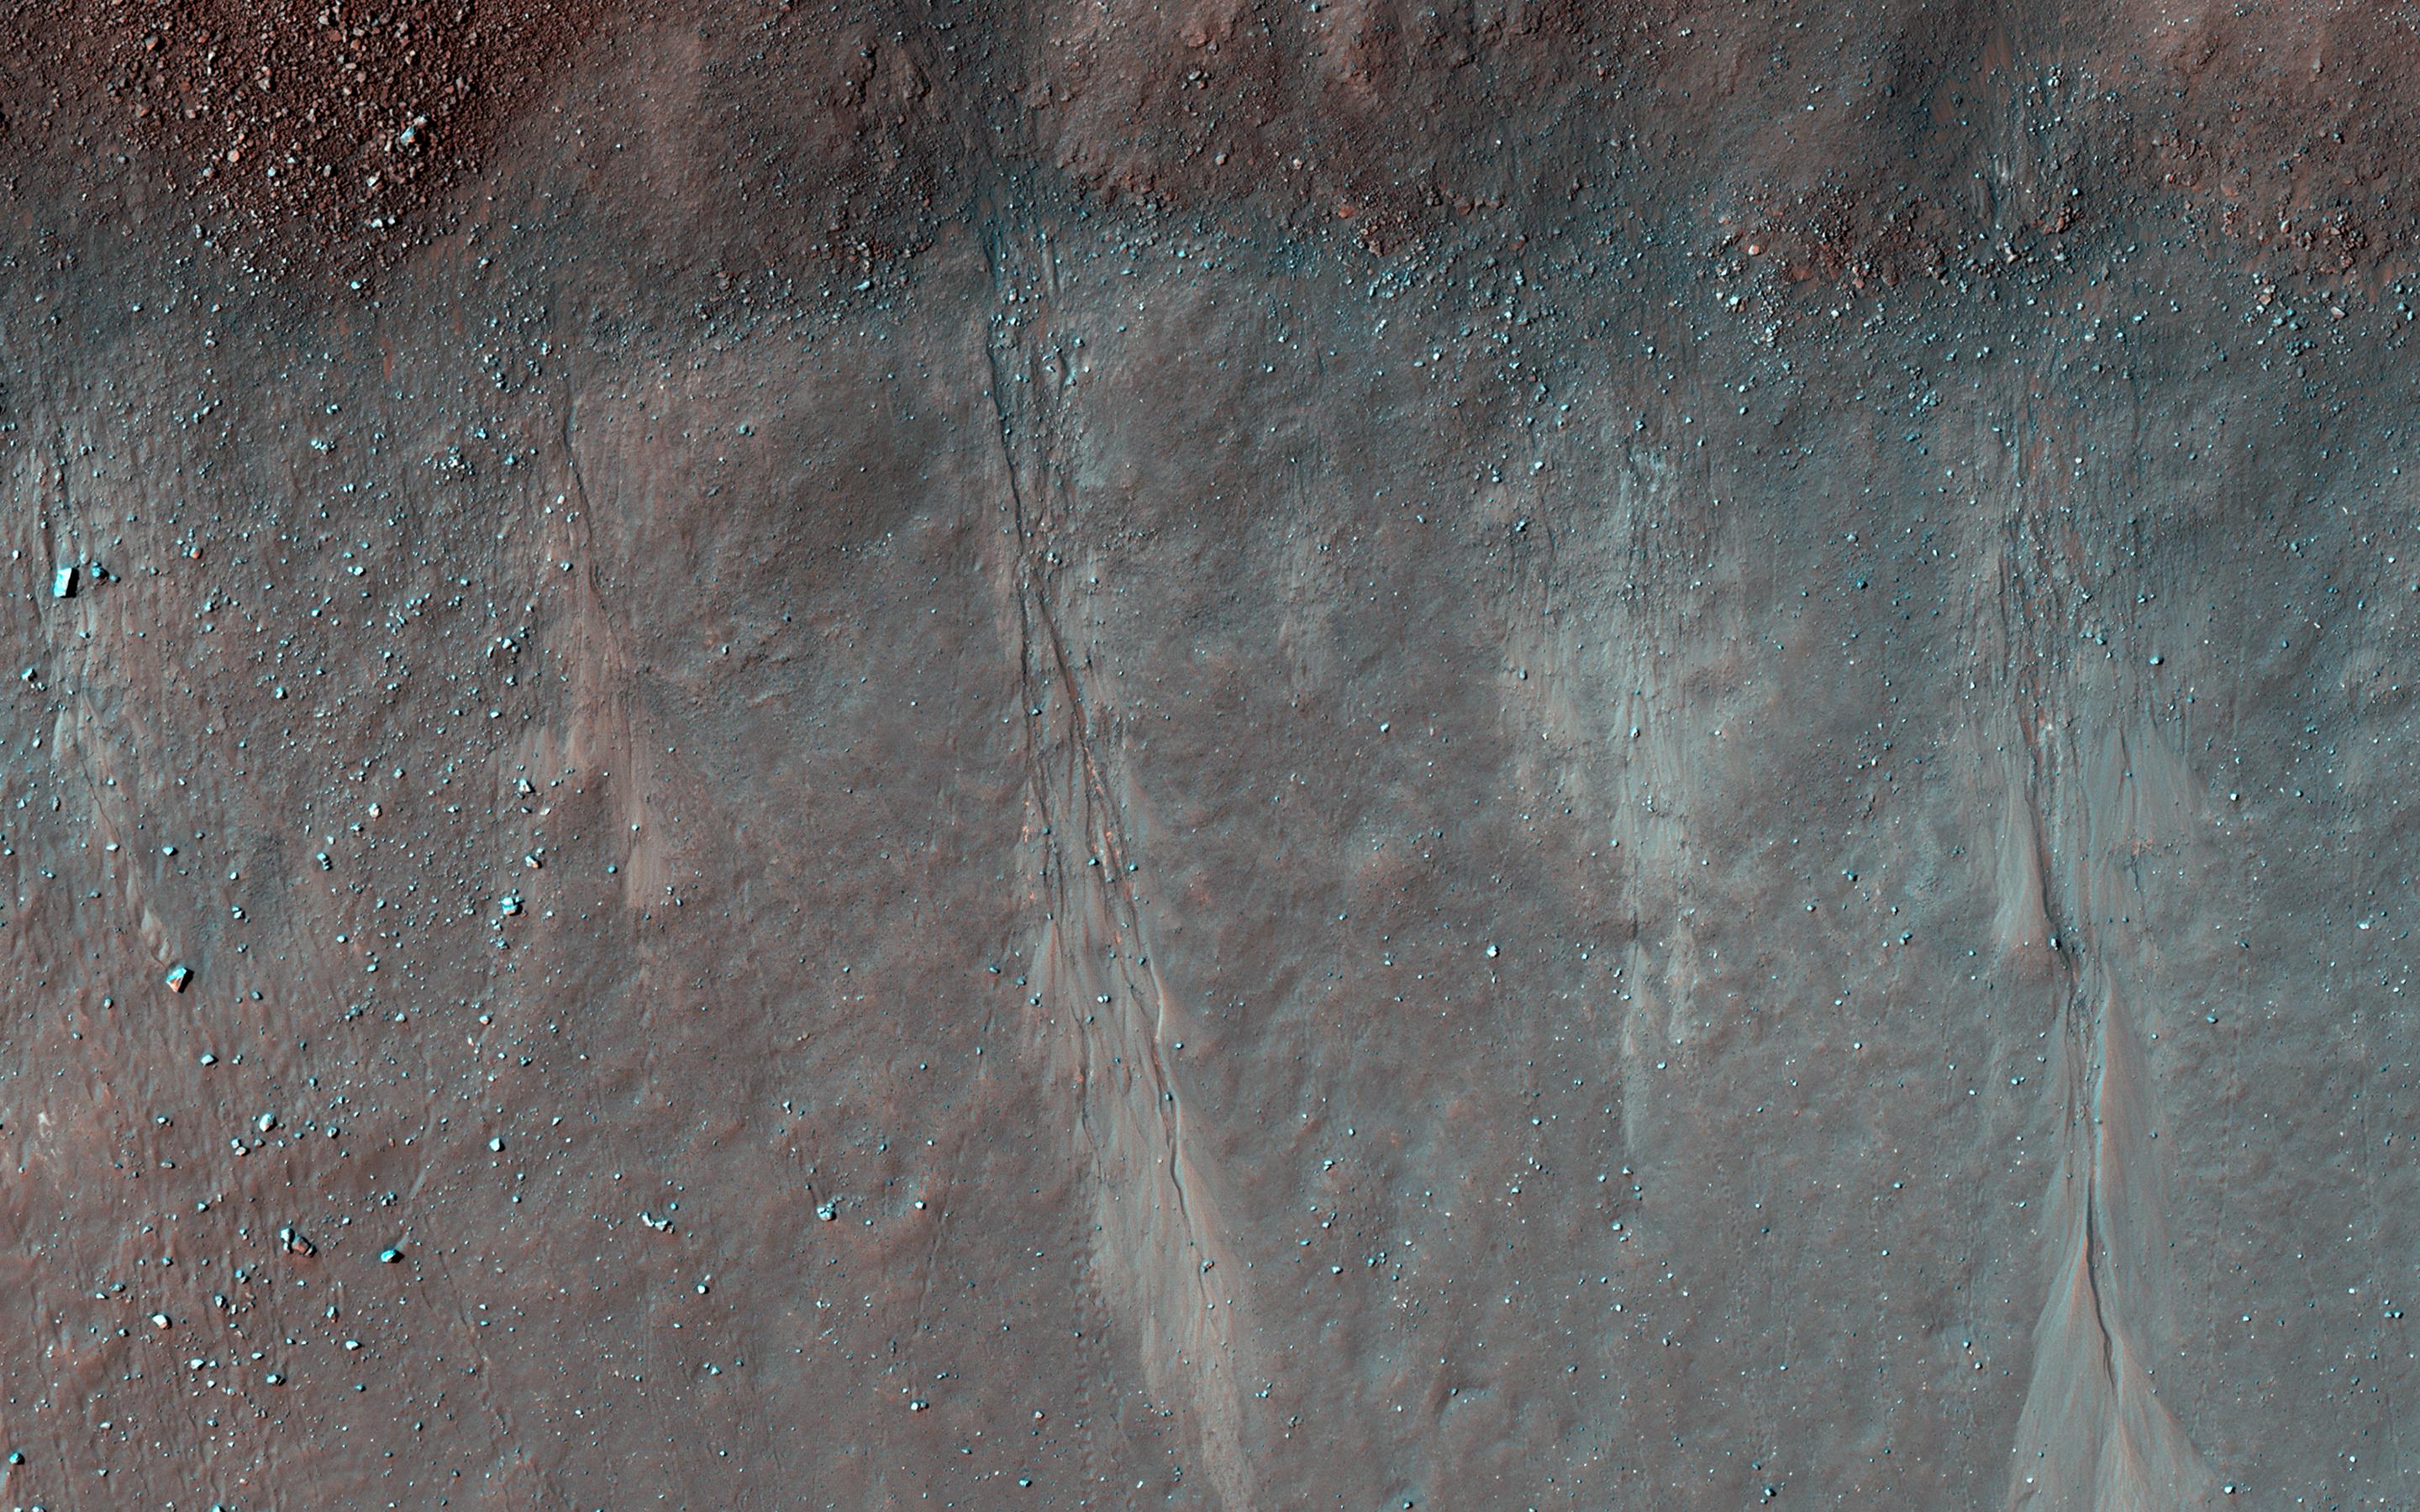 This image acquired on August 28, 2022 by NASAs Mars Reconnaissance Orbiter shows several shallow gully channels with associated debris aprons emanating from a buried layer on the interior of a crater wall.